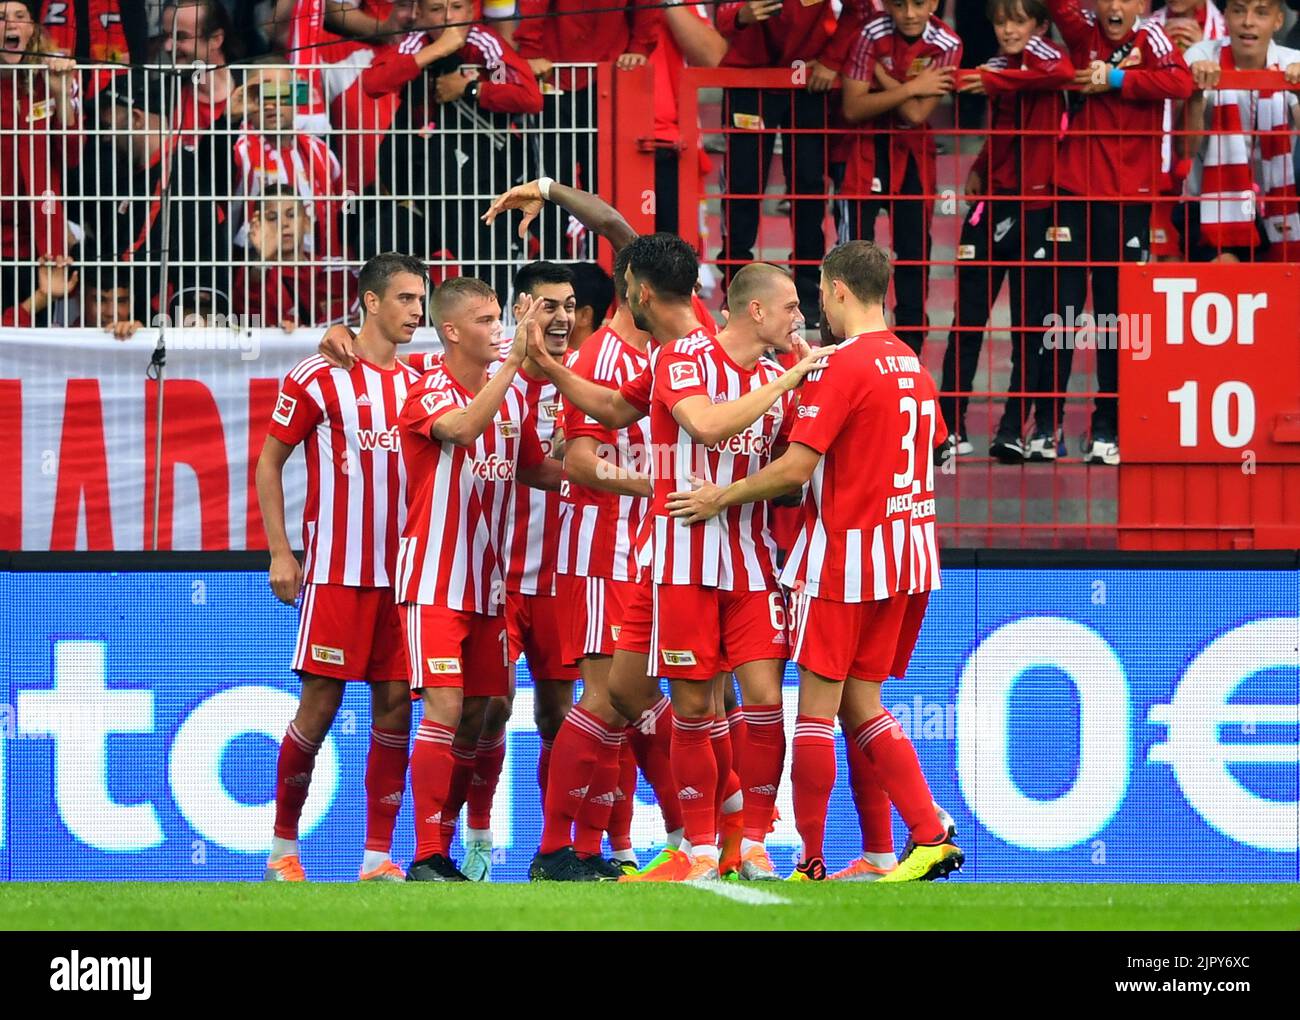 Fc union berlin hi-res stock photography and images - Alamy